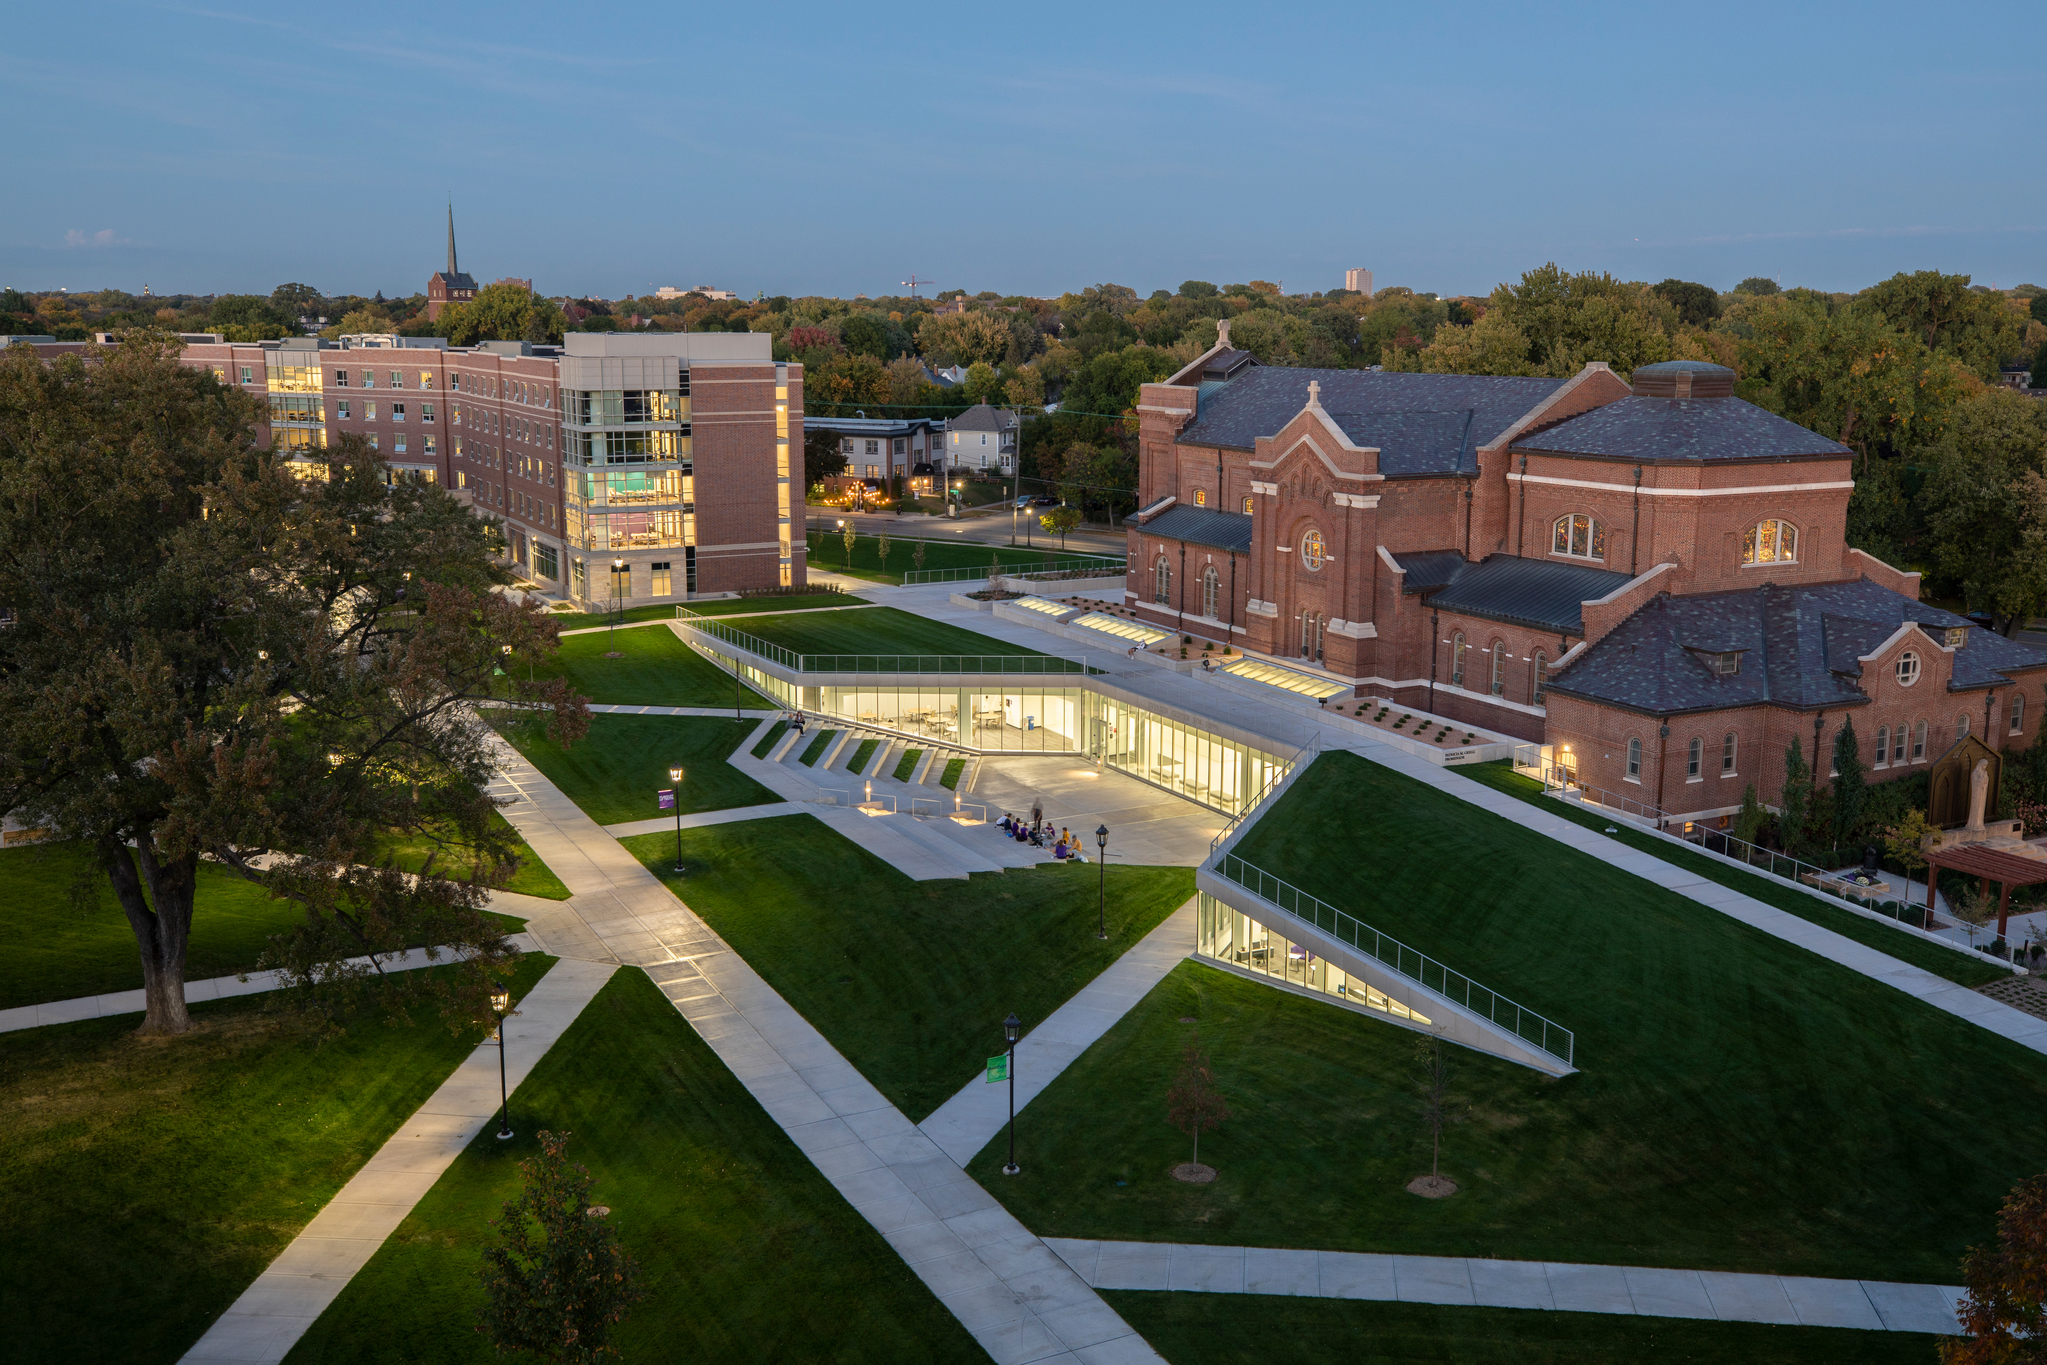 A wide view of the upper quad featuring the Iversen Center for Faith, Aquinas Chapel and Tommie North Residence Hall as photographed at dusk on the rooftop of Brady Hall in St. Paul on September 29, 2020.